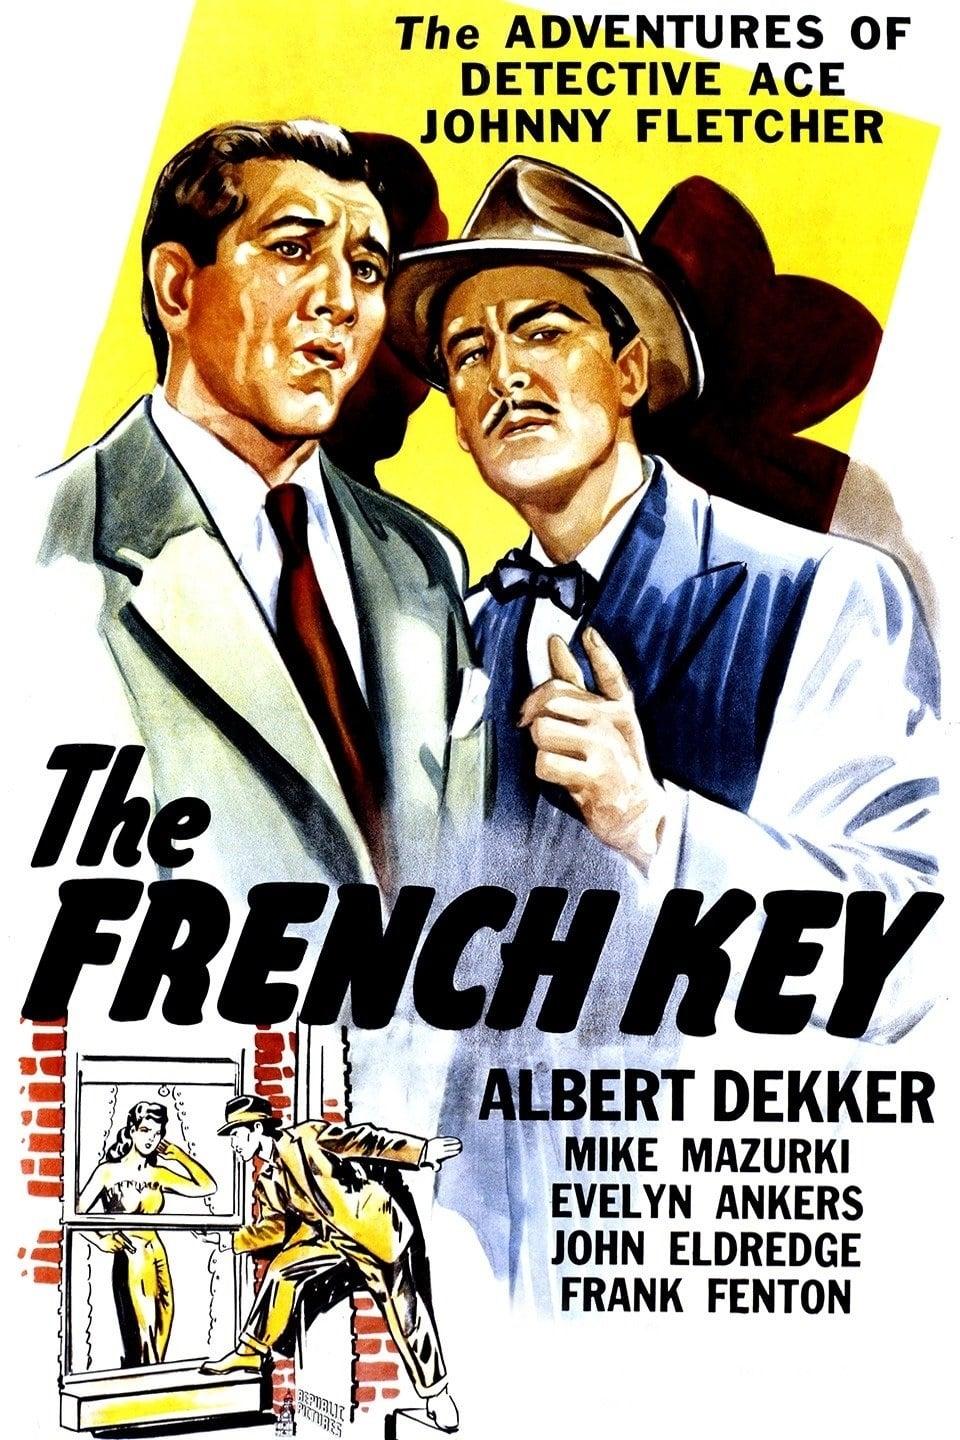 The French Key poster